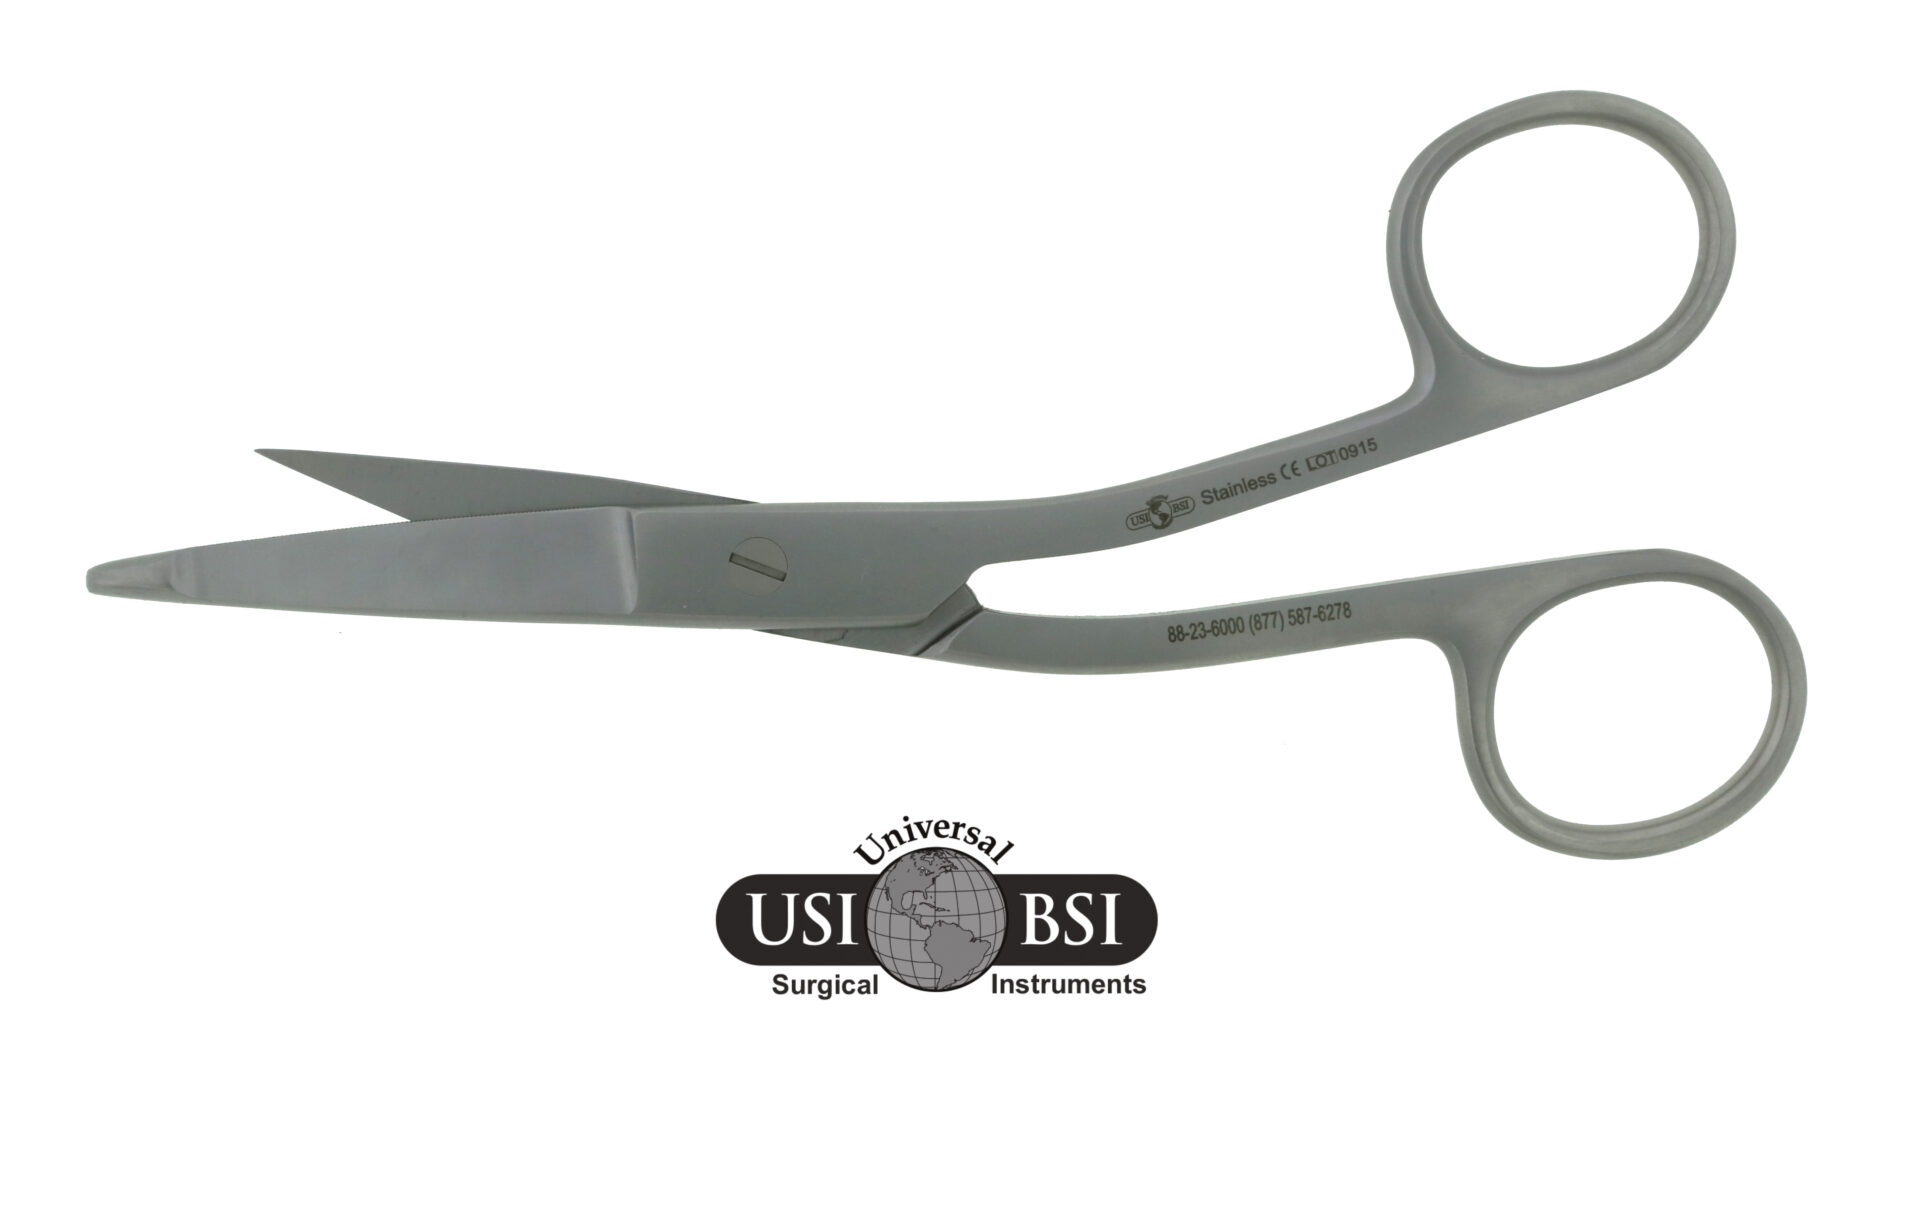 A pair of scissors with the us / bsi logo on top.